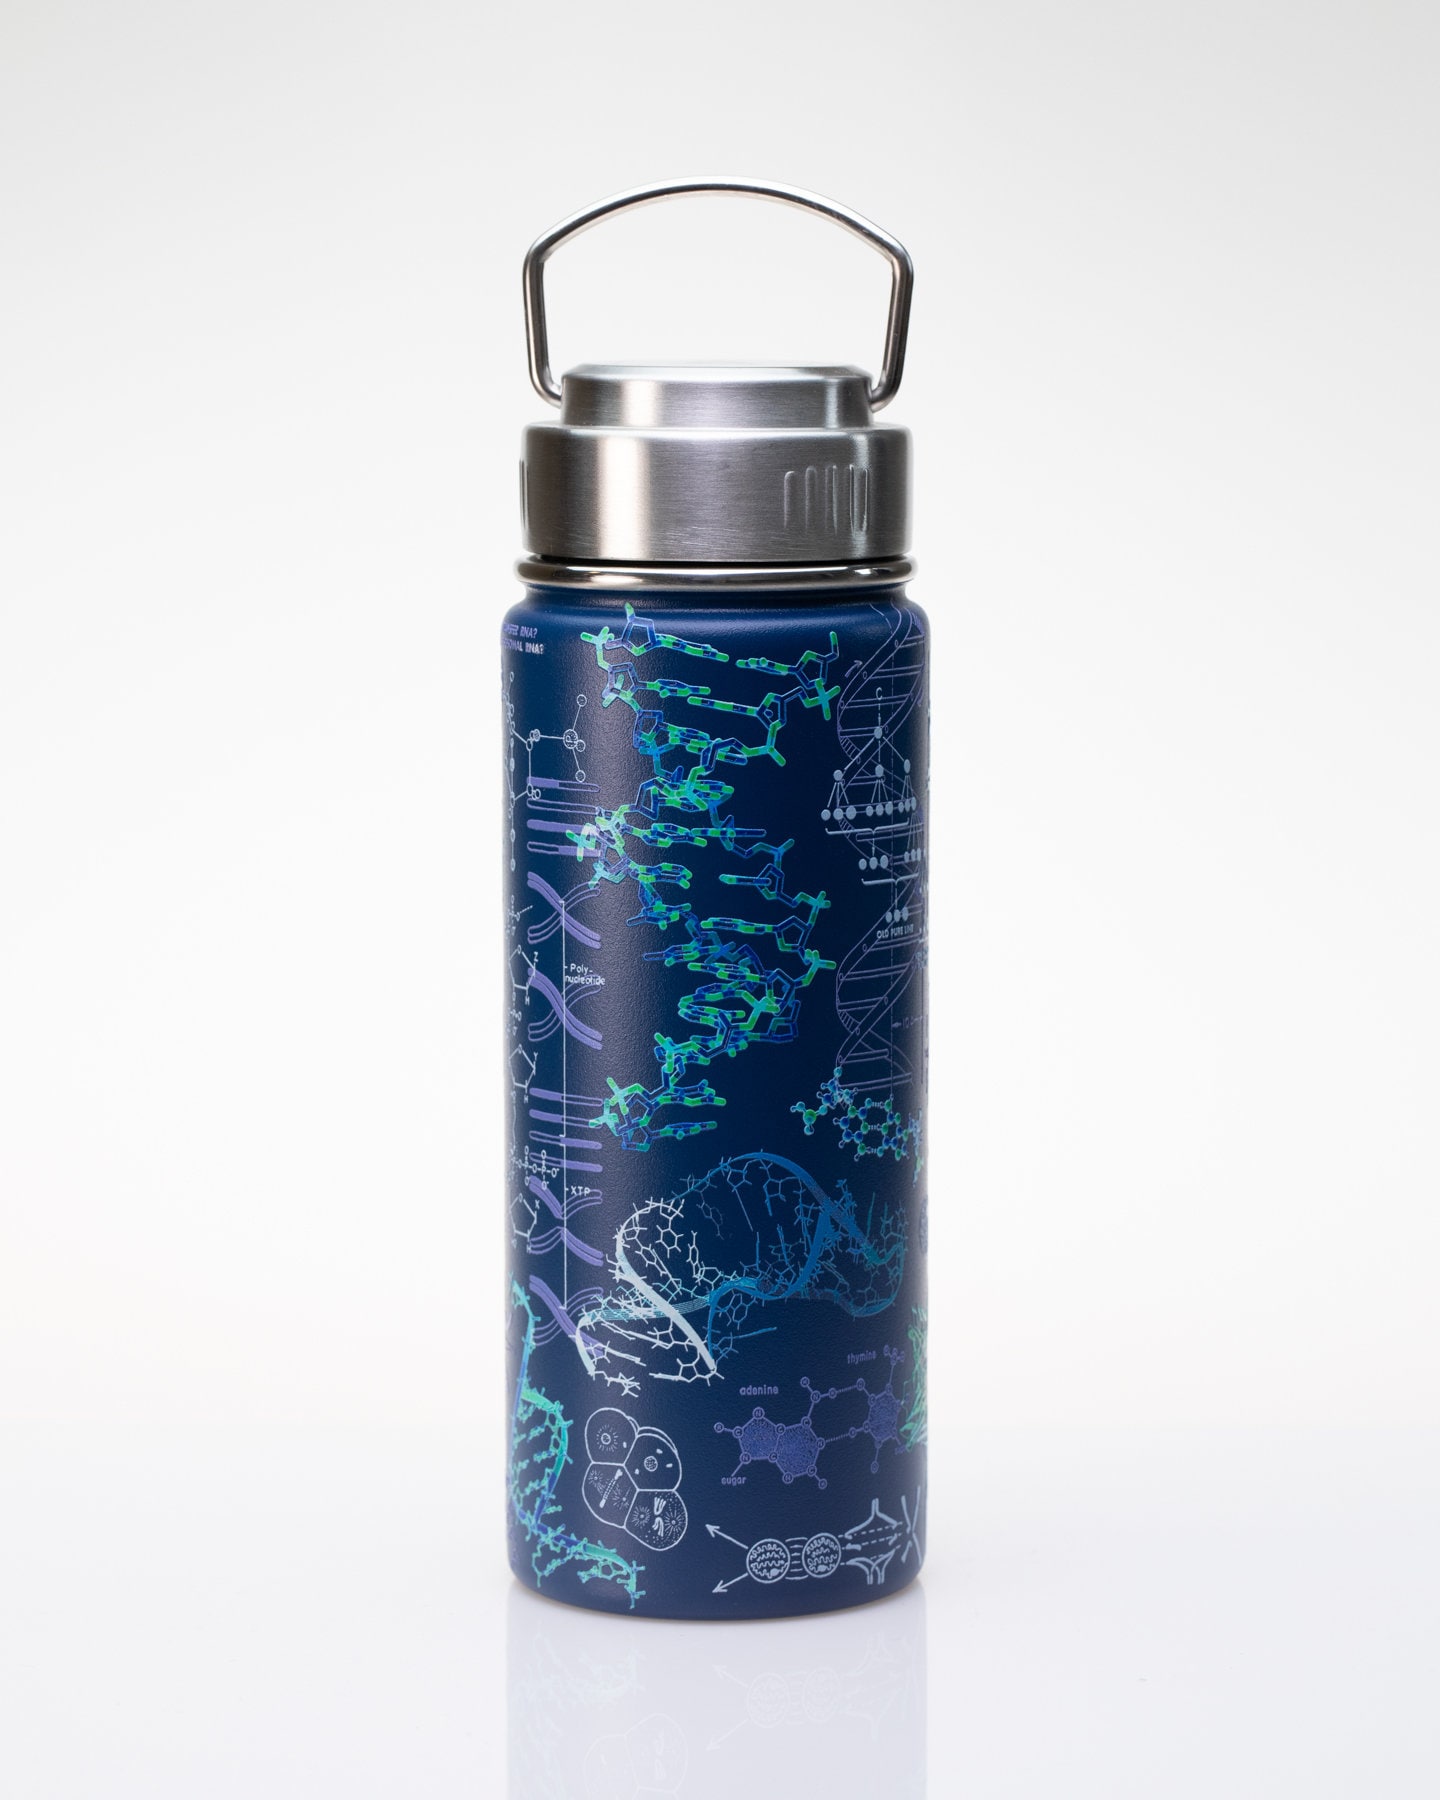 Oregon Vacuum Insulated Bottle 32oz iconic Design Stainless Steel Bottle  Laser Engraved Thermos Leak Proof Hot or Cold 